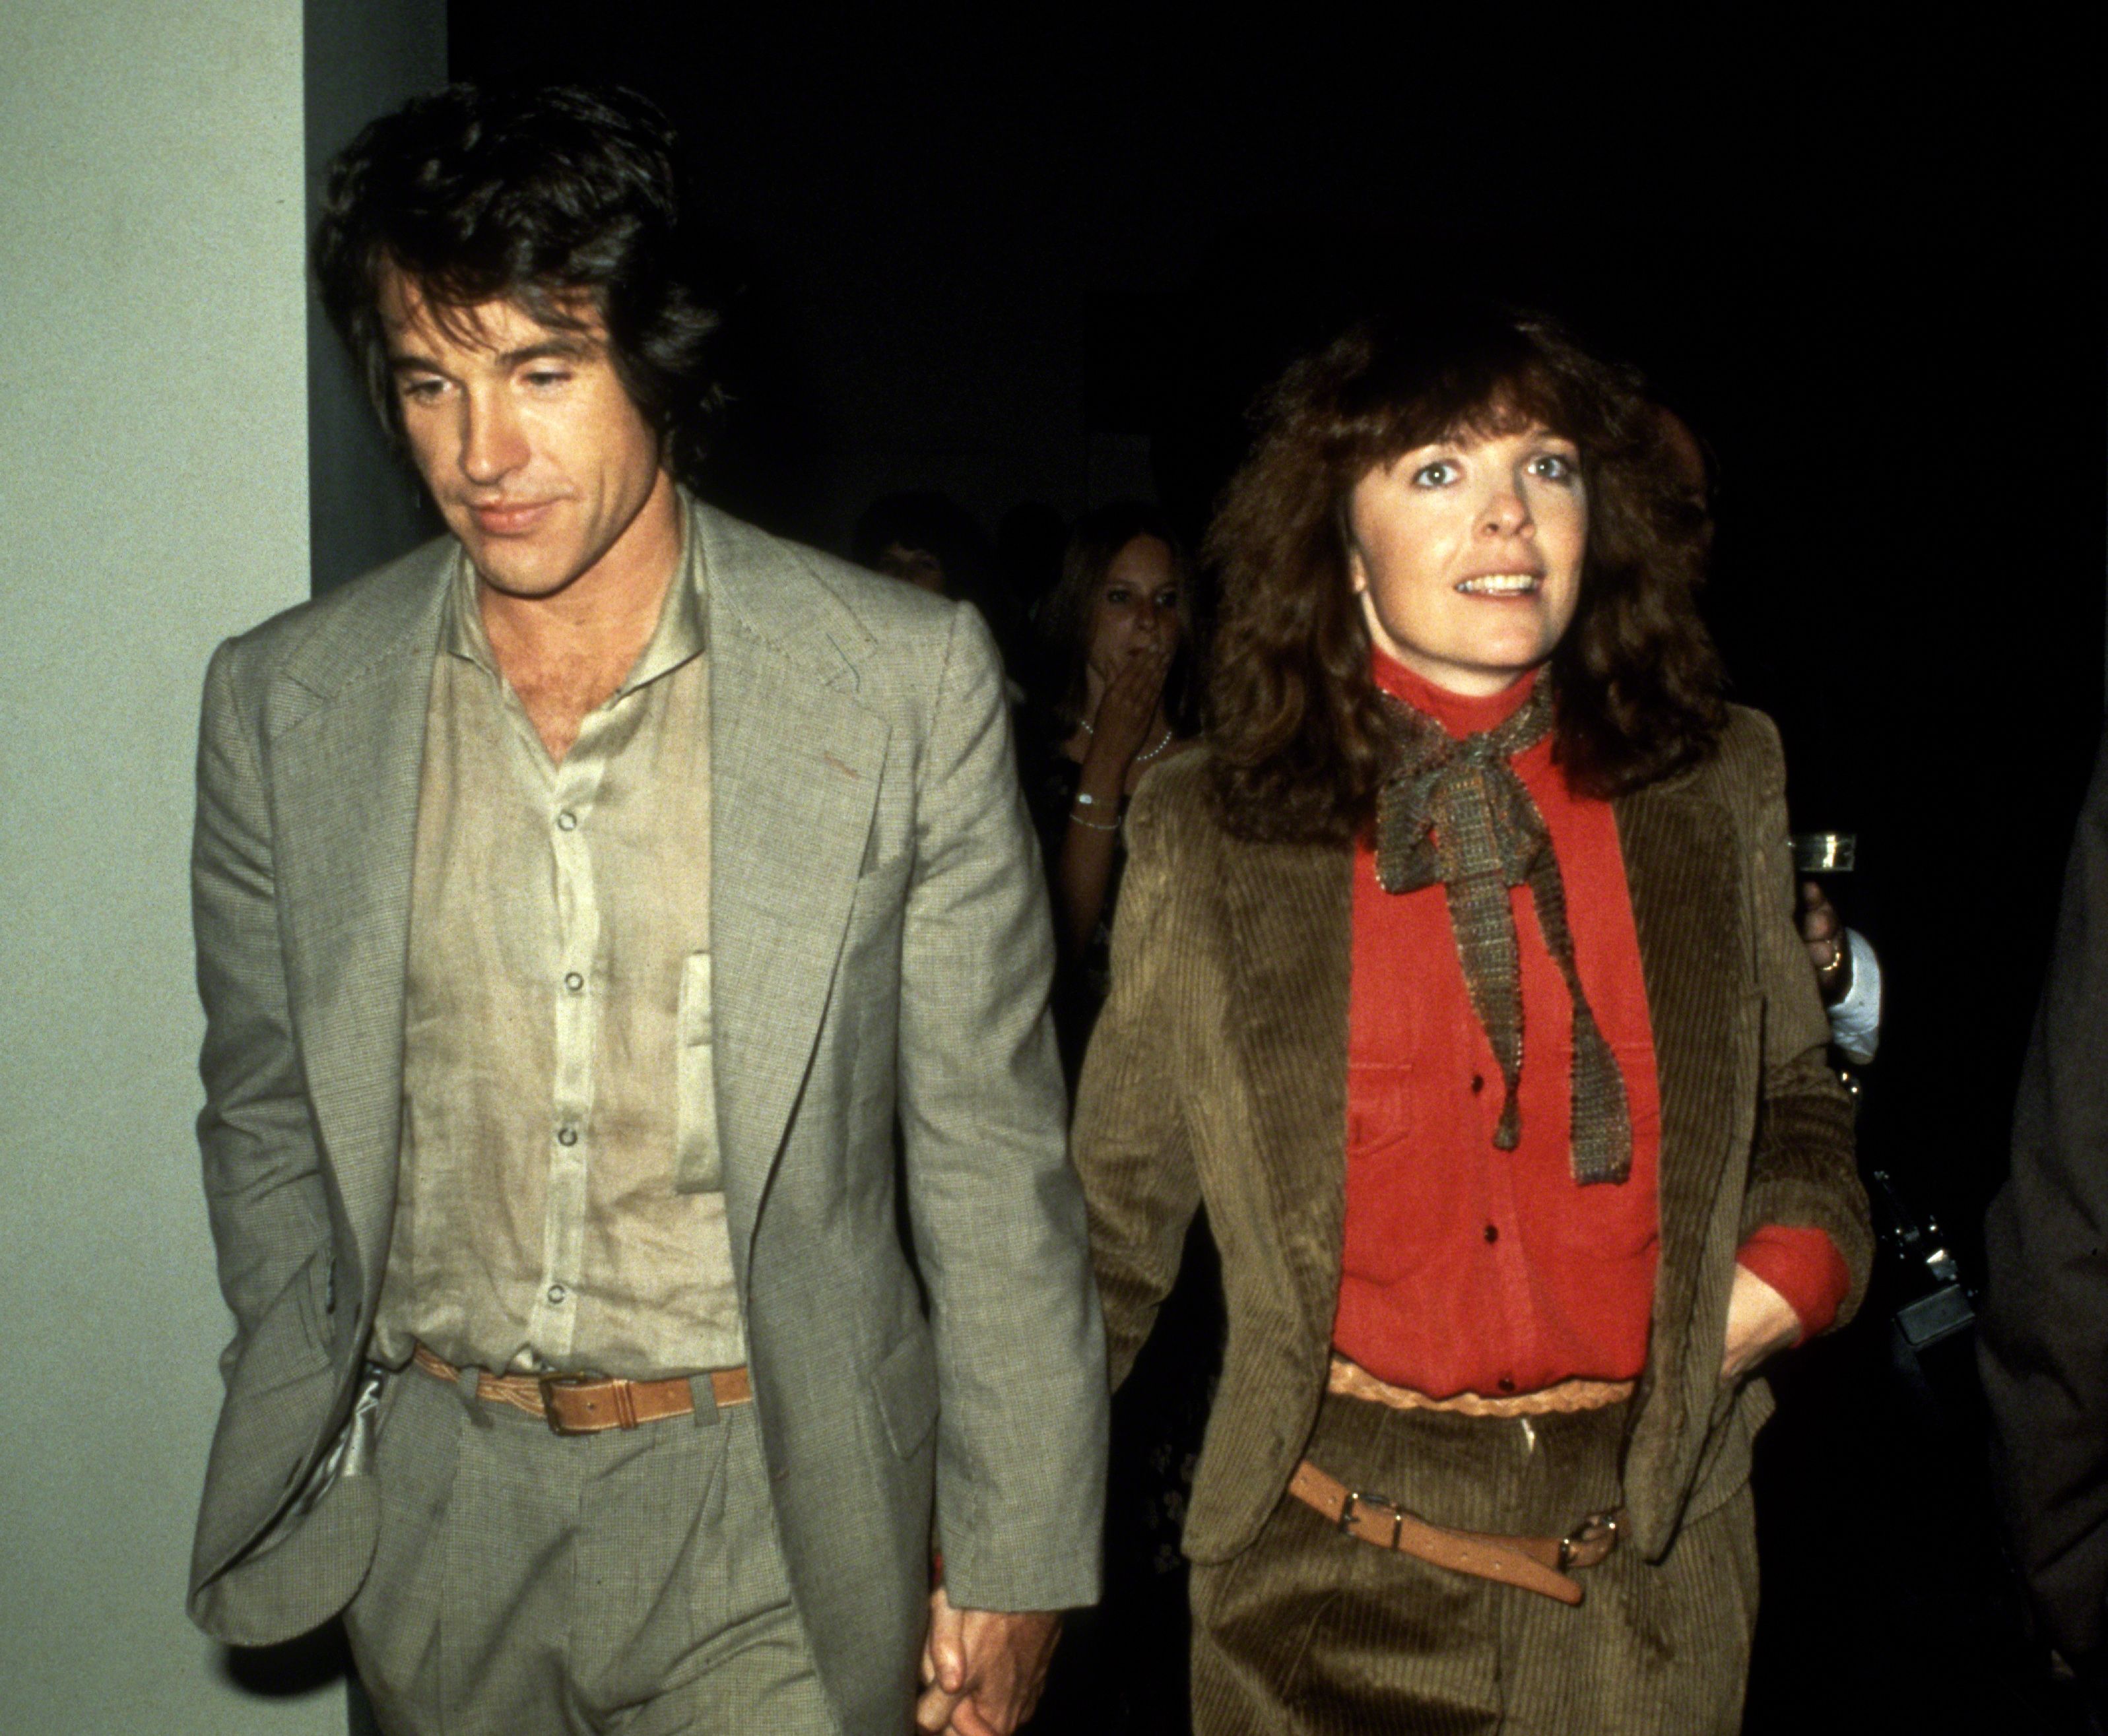 Warren Beatty and Diane Keaton in New York City, in circa 1978. | Source: Sonia Moskowitz/IMAGES/Getty Images